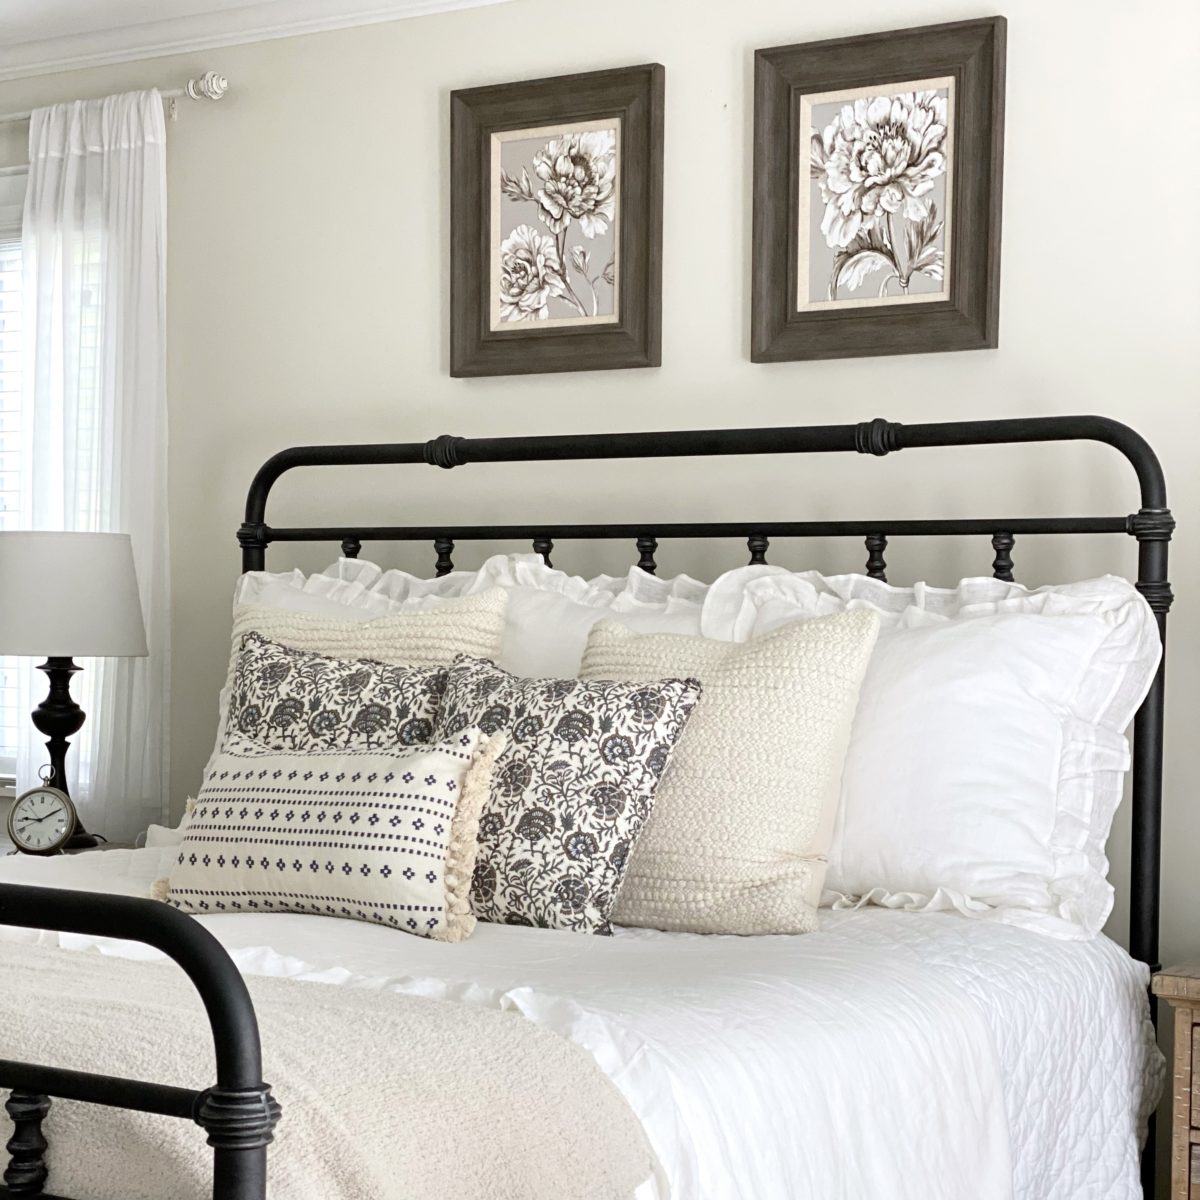 Simple summer bedroom white bedding with layers and florals.